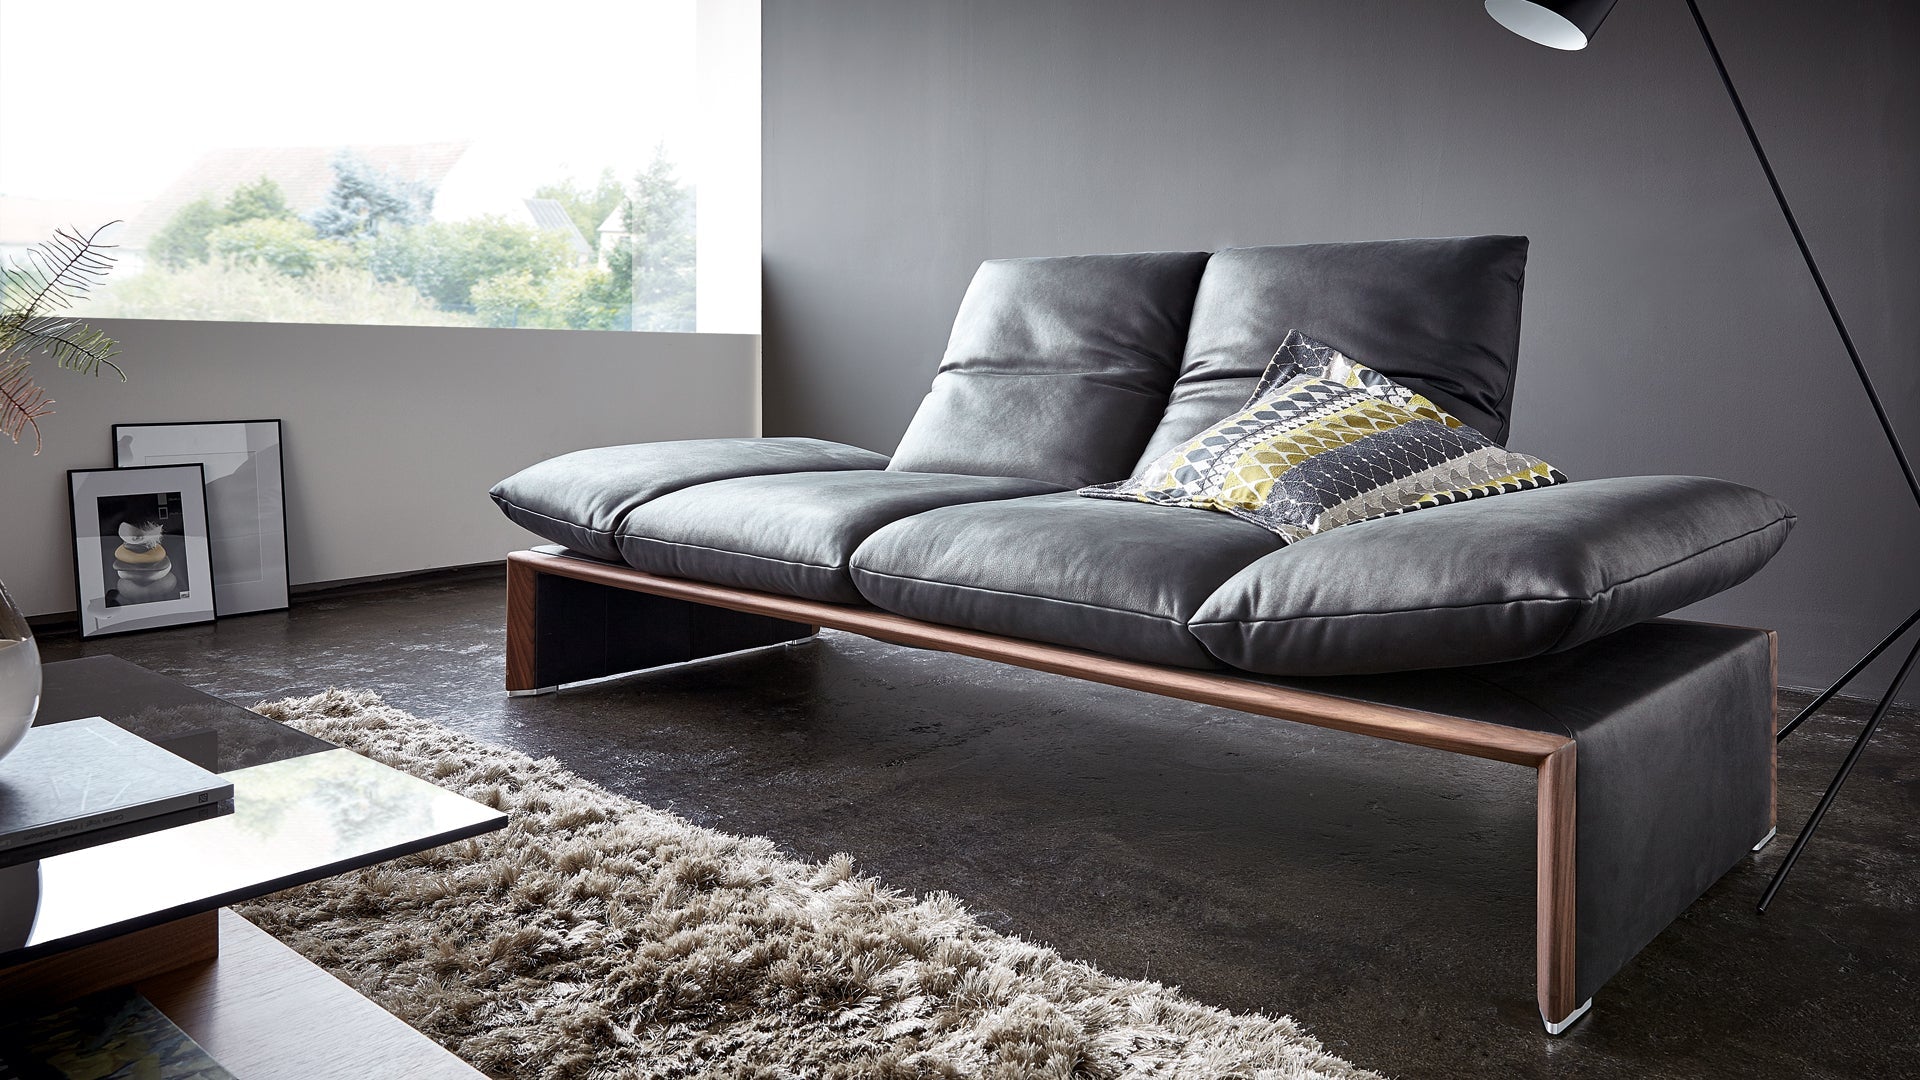 HARRIET 2.5 Seater Sofa in Leather by Koinor